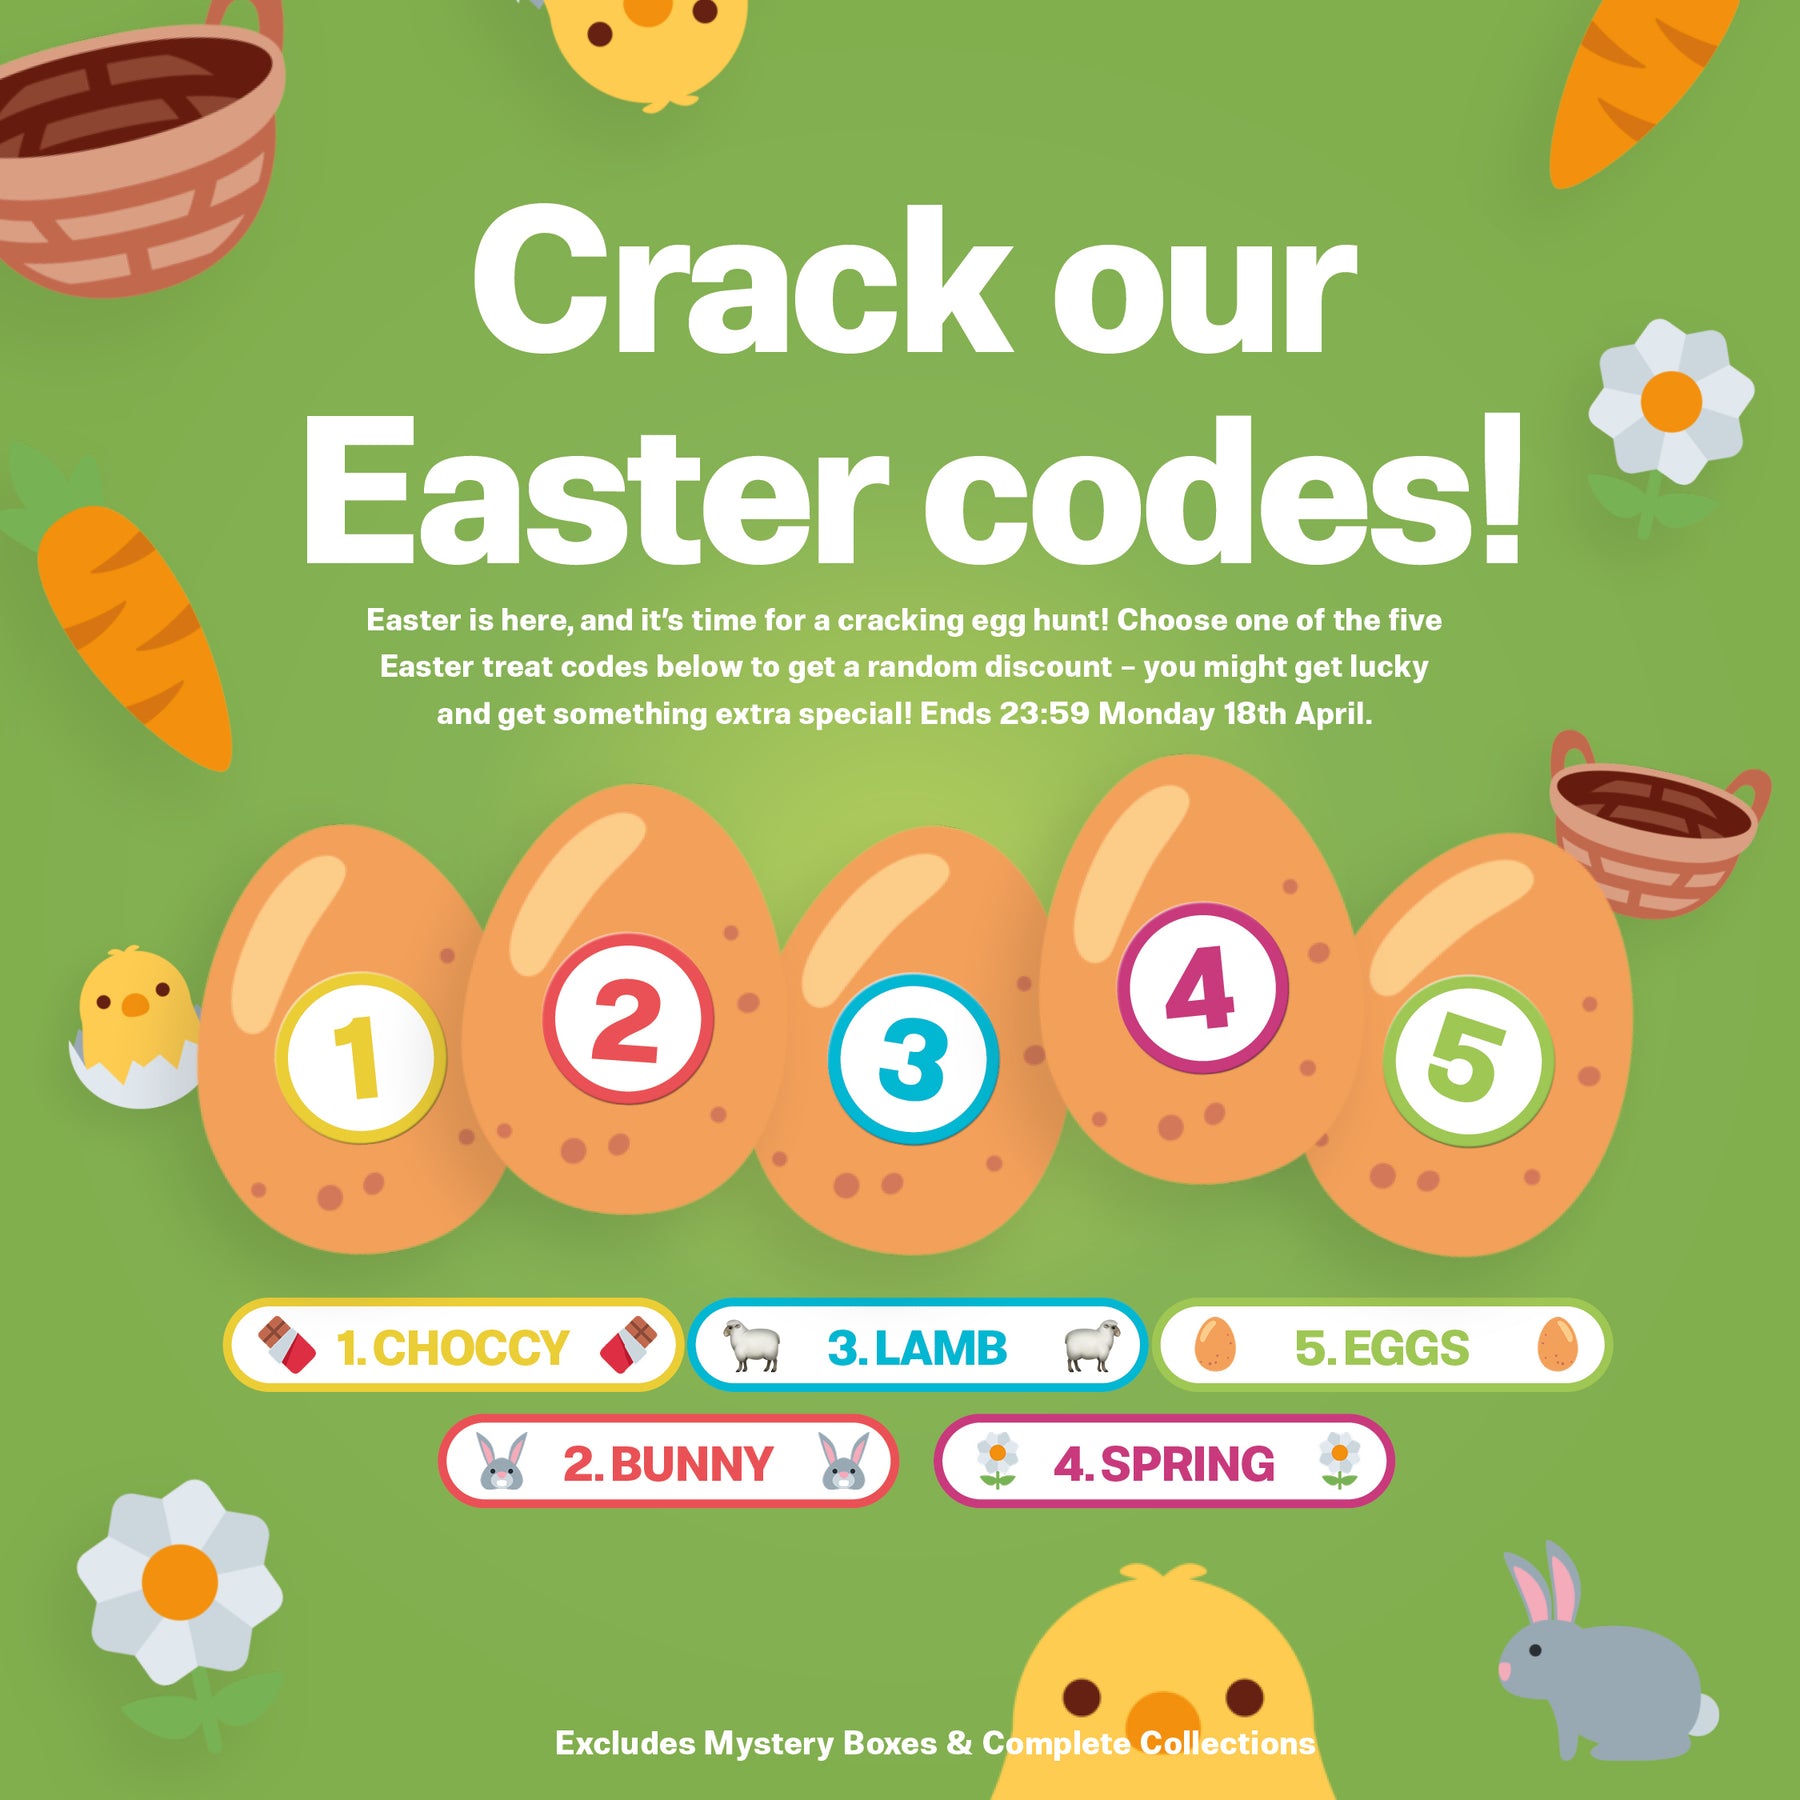 Crack our Easter codes!